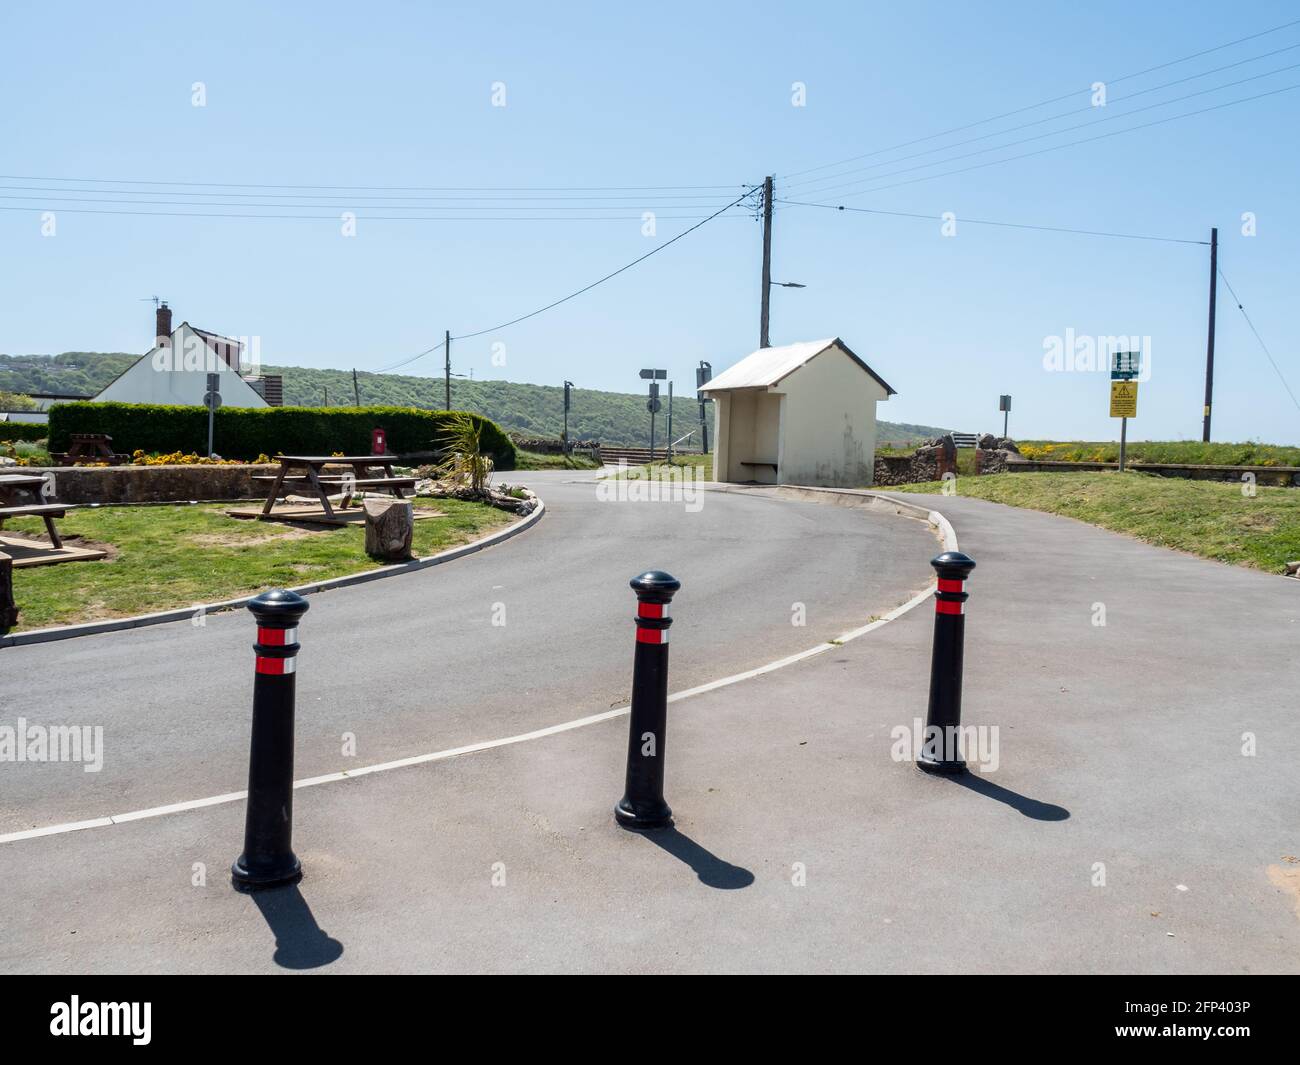 The Bus Stop and Shelter at Sand Bay, near Weston-super-Mare, in North Somerset, UK. Stock Photo